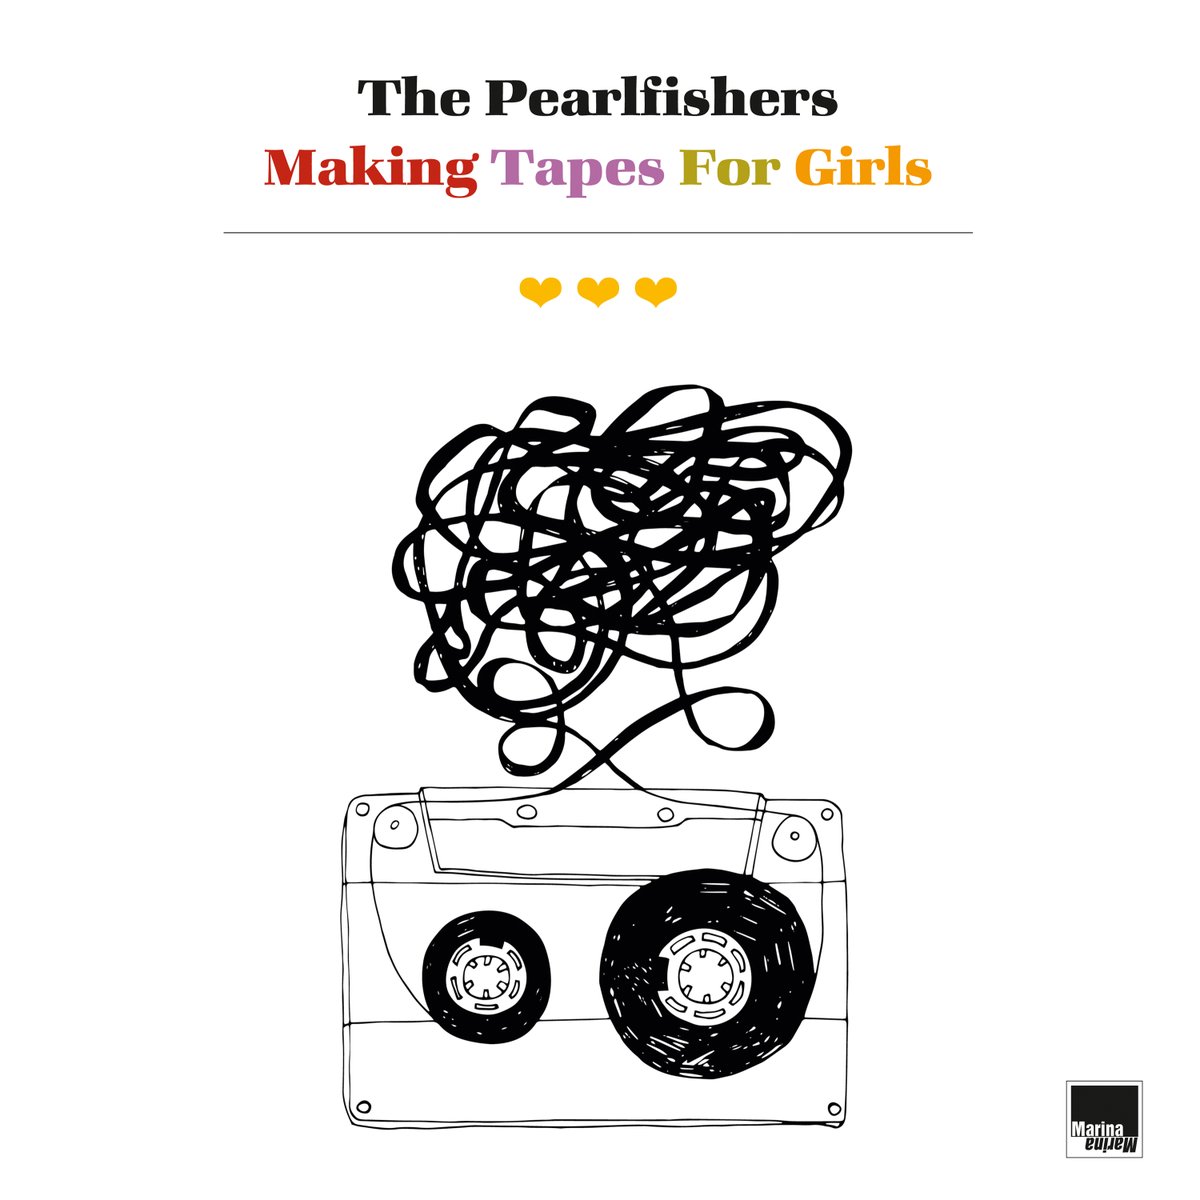 The Pearlfishers will be performing their new album on Marina Records, Making Tapes For Girls, at the Strathaven Hotel on Fri 7th June as a FRETS: ALBUM CONCERT exclusive. Tickets will go on sale this Friday 29th March, details soon.